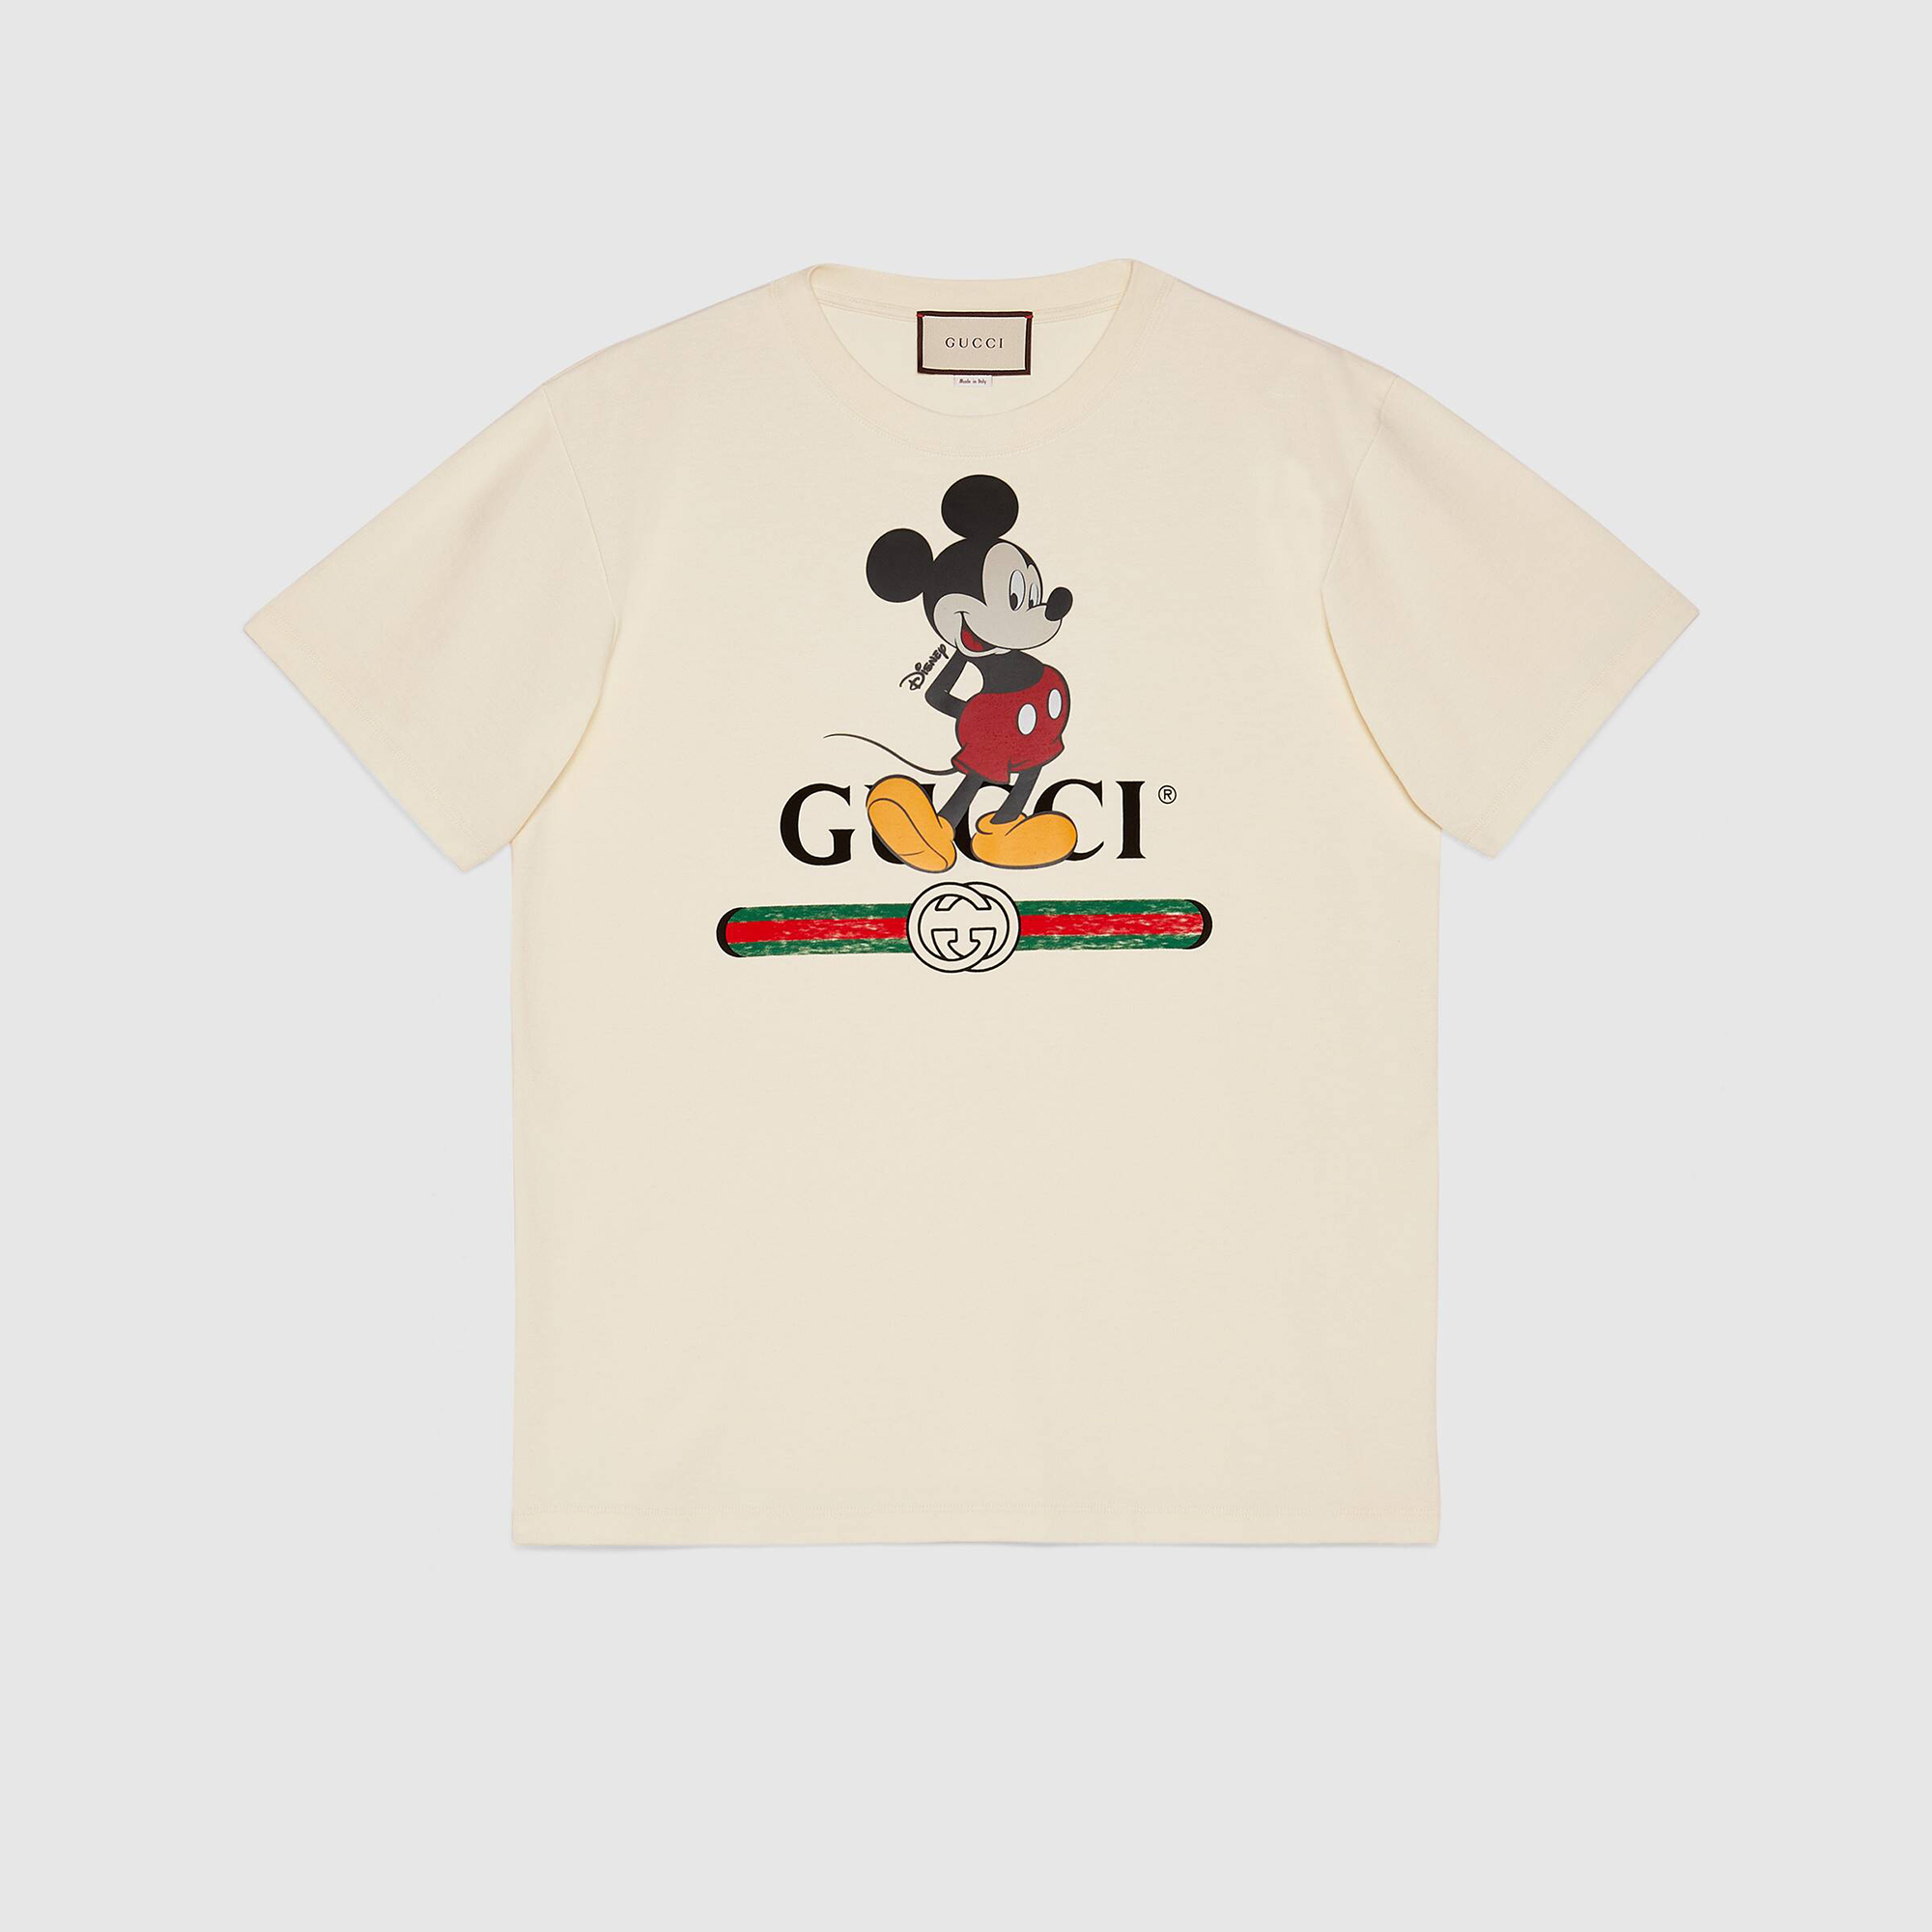 gucci mickey mouse luxury brand premium fashion hawaii shirt for